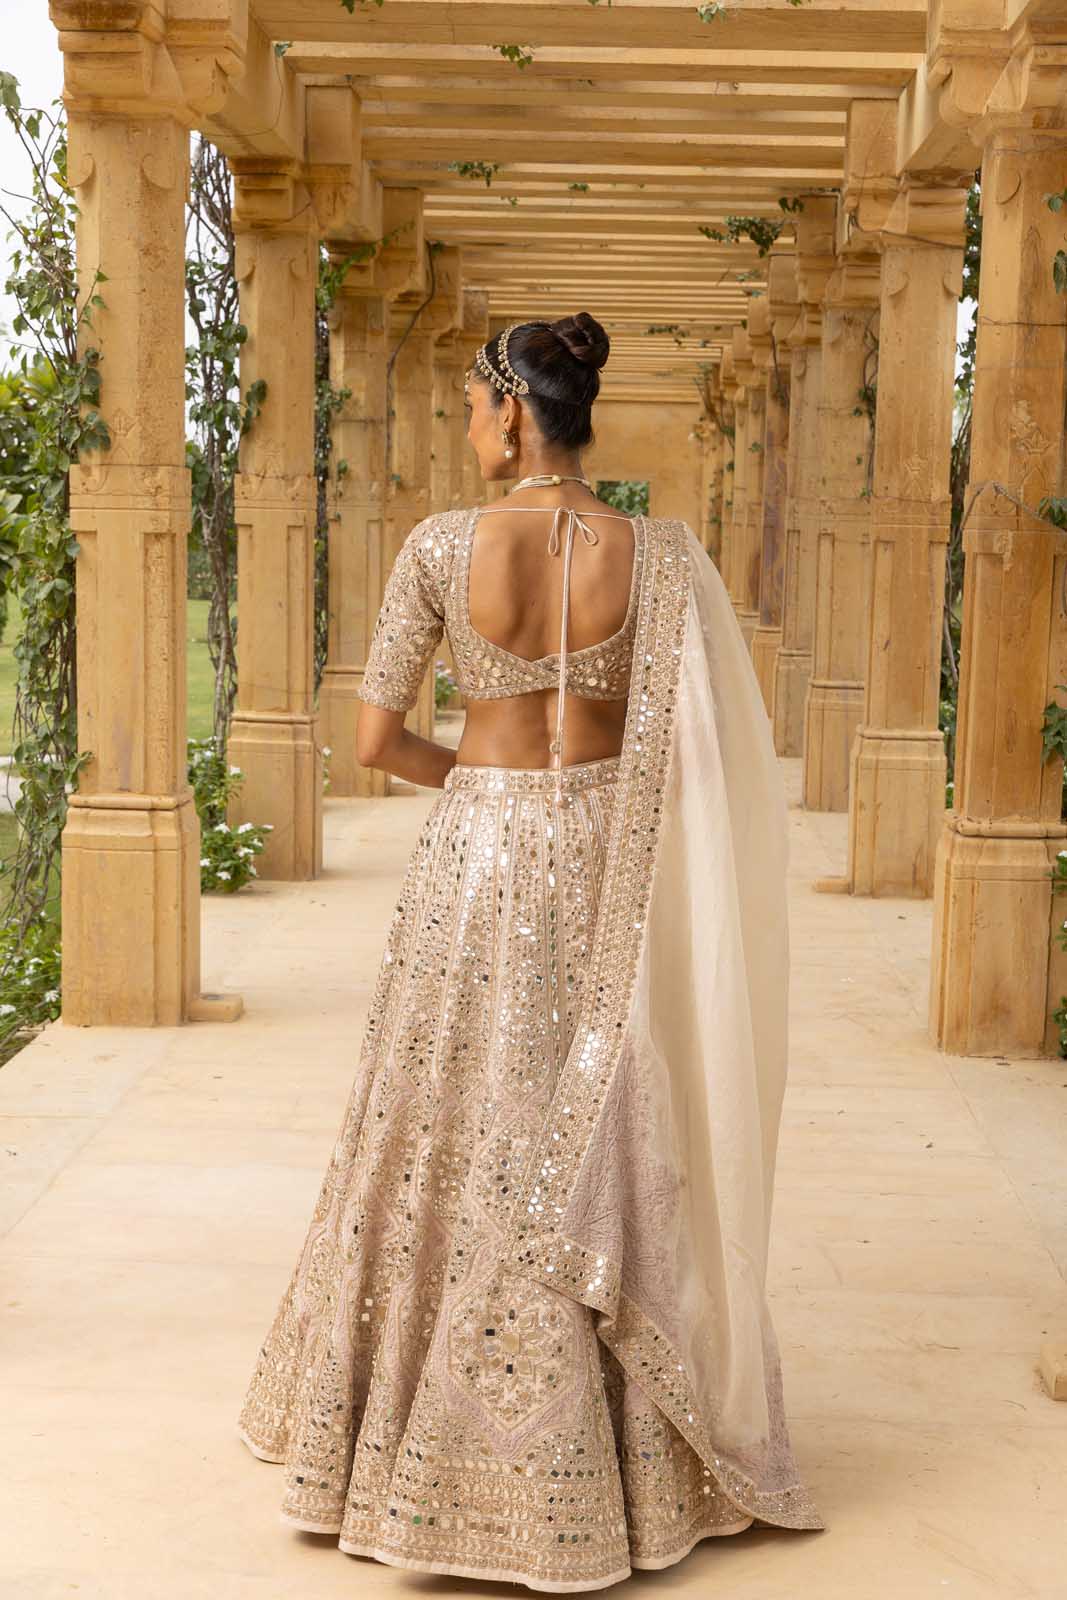 5 intricate Bridal Blouse Designs that will take your hearts away